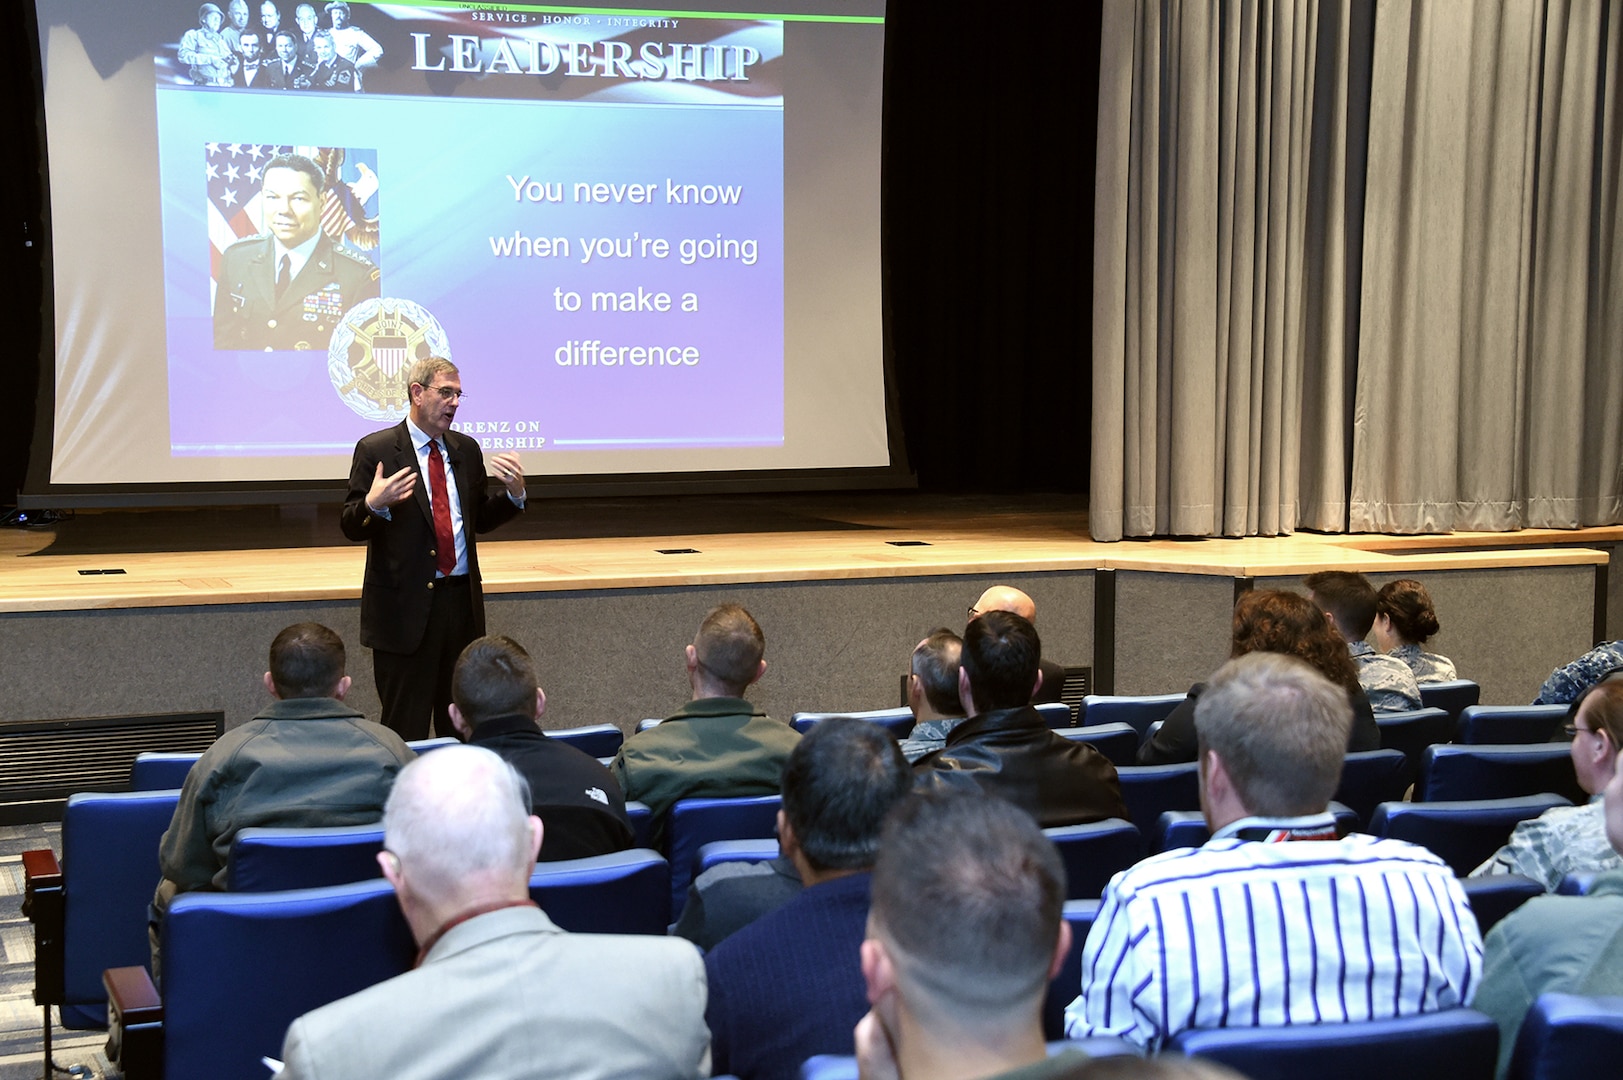 Retired U.S. Air Force Gen. Stephen Lorenz shares his perspective on leadership with members of U.S. Strategic Command during his visit to Offutt Air Force Base, Neb., Nov. 6, 2017. Lorenz, who retired as commander of Air Education and Training Command, discussed the traits and practices of effective leaders based on his experience as a military officer and commander.